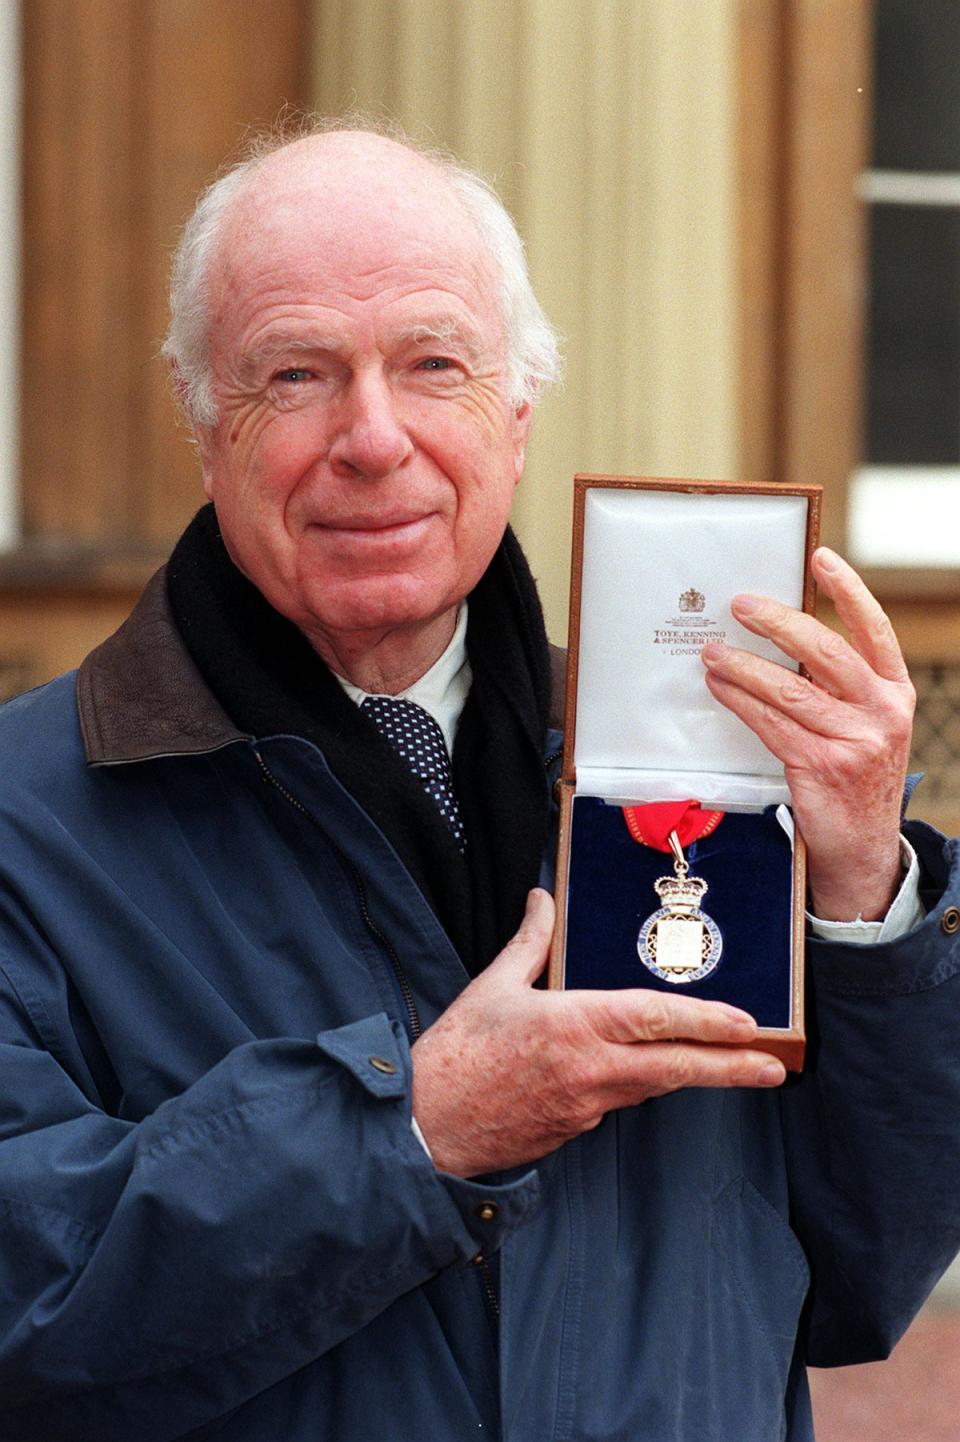 Peter Brook outside Buckingham Palace after receiving the Insignia of a member of the Order of the Companions of Honour from the Queen (PA) (PA Wire)